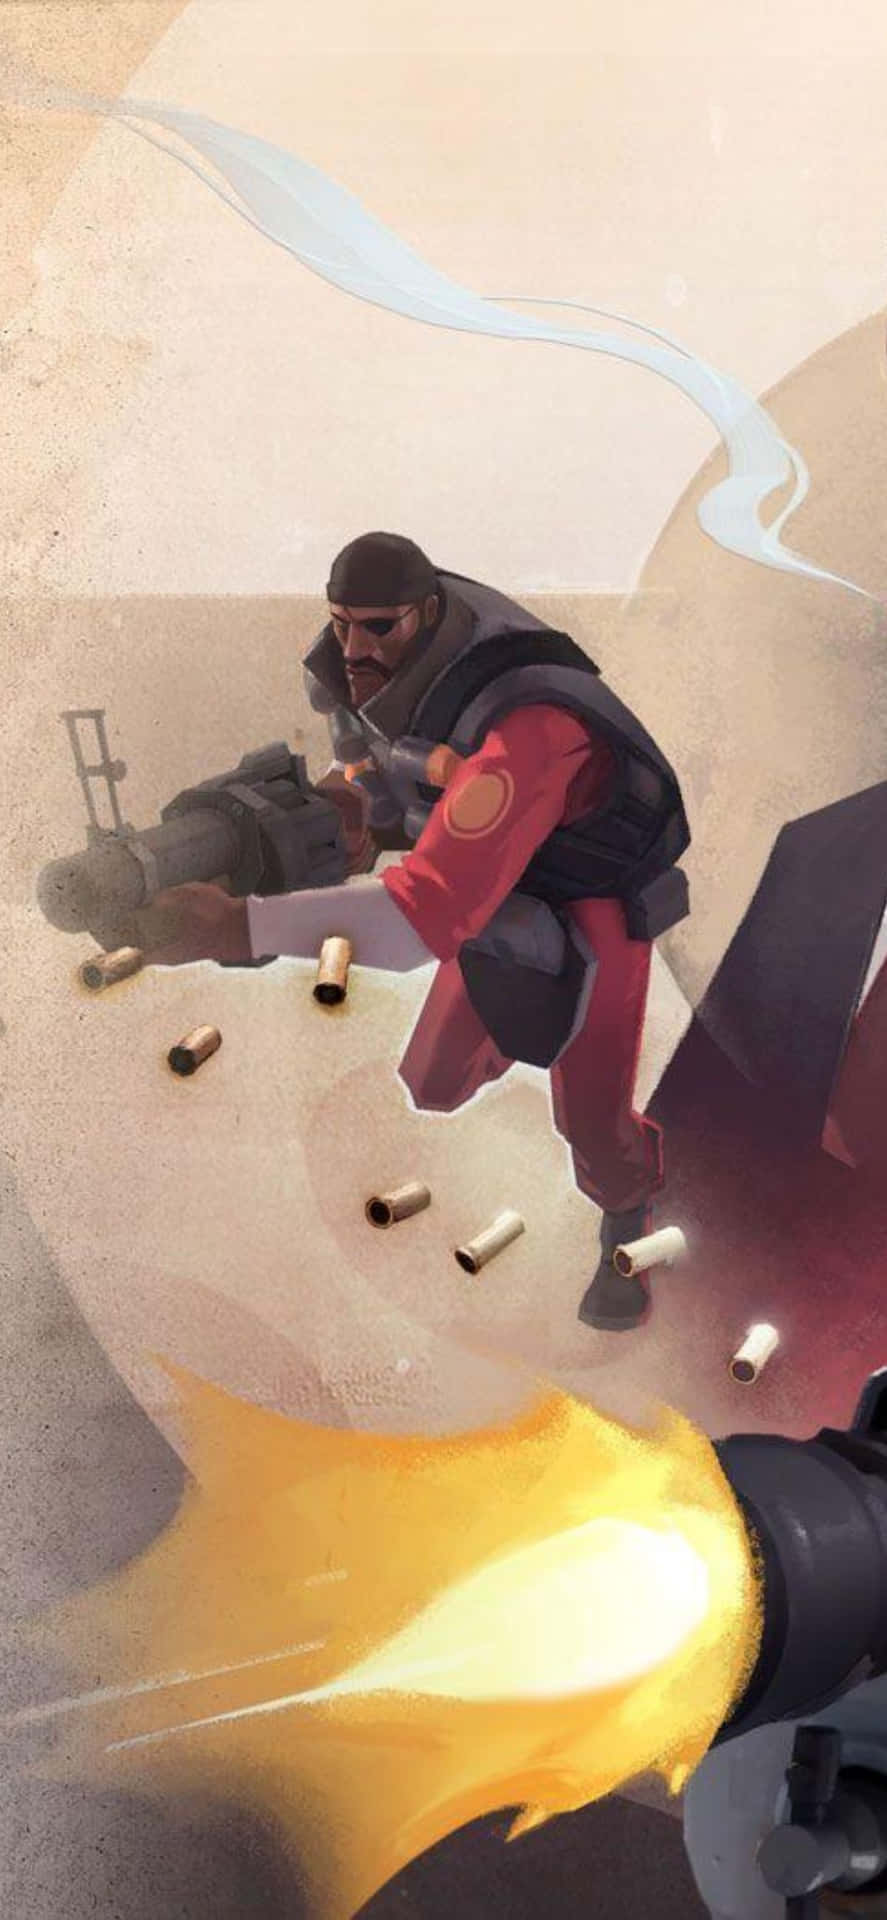 Iphone Xs Team Fortress 2 Background 1125 X 2436 Background